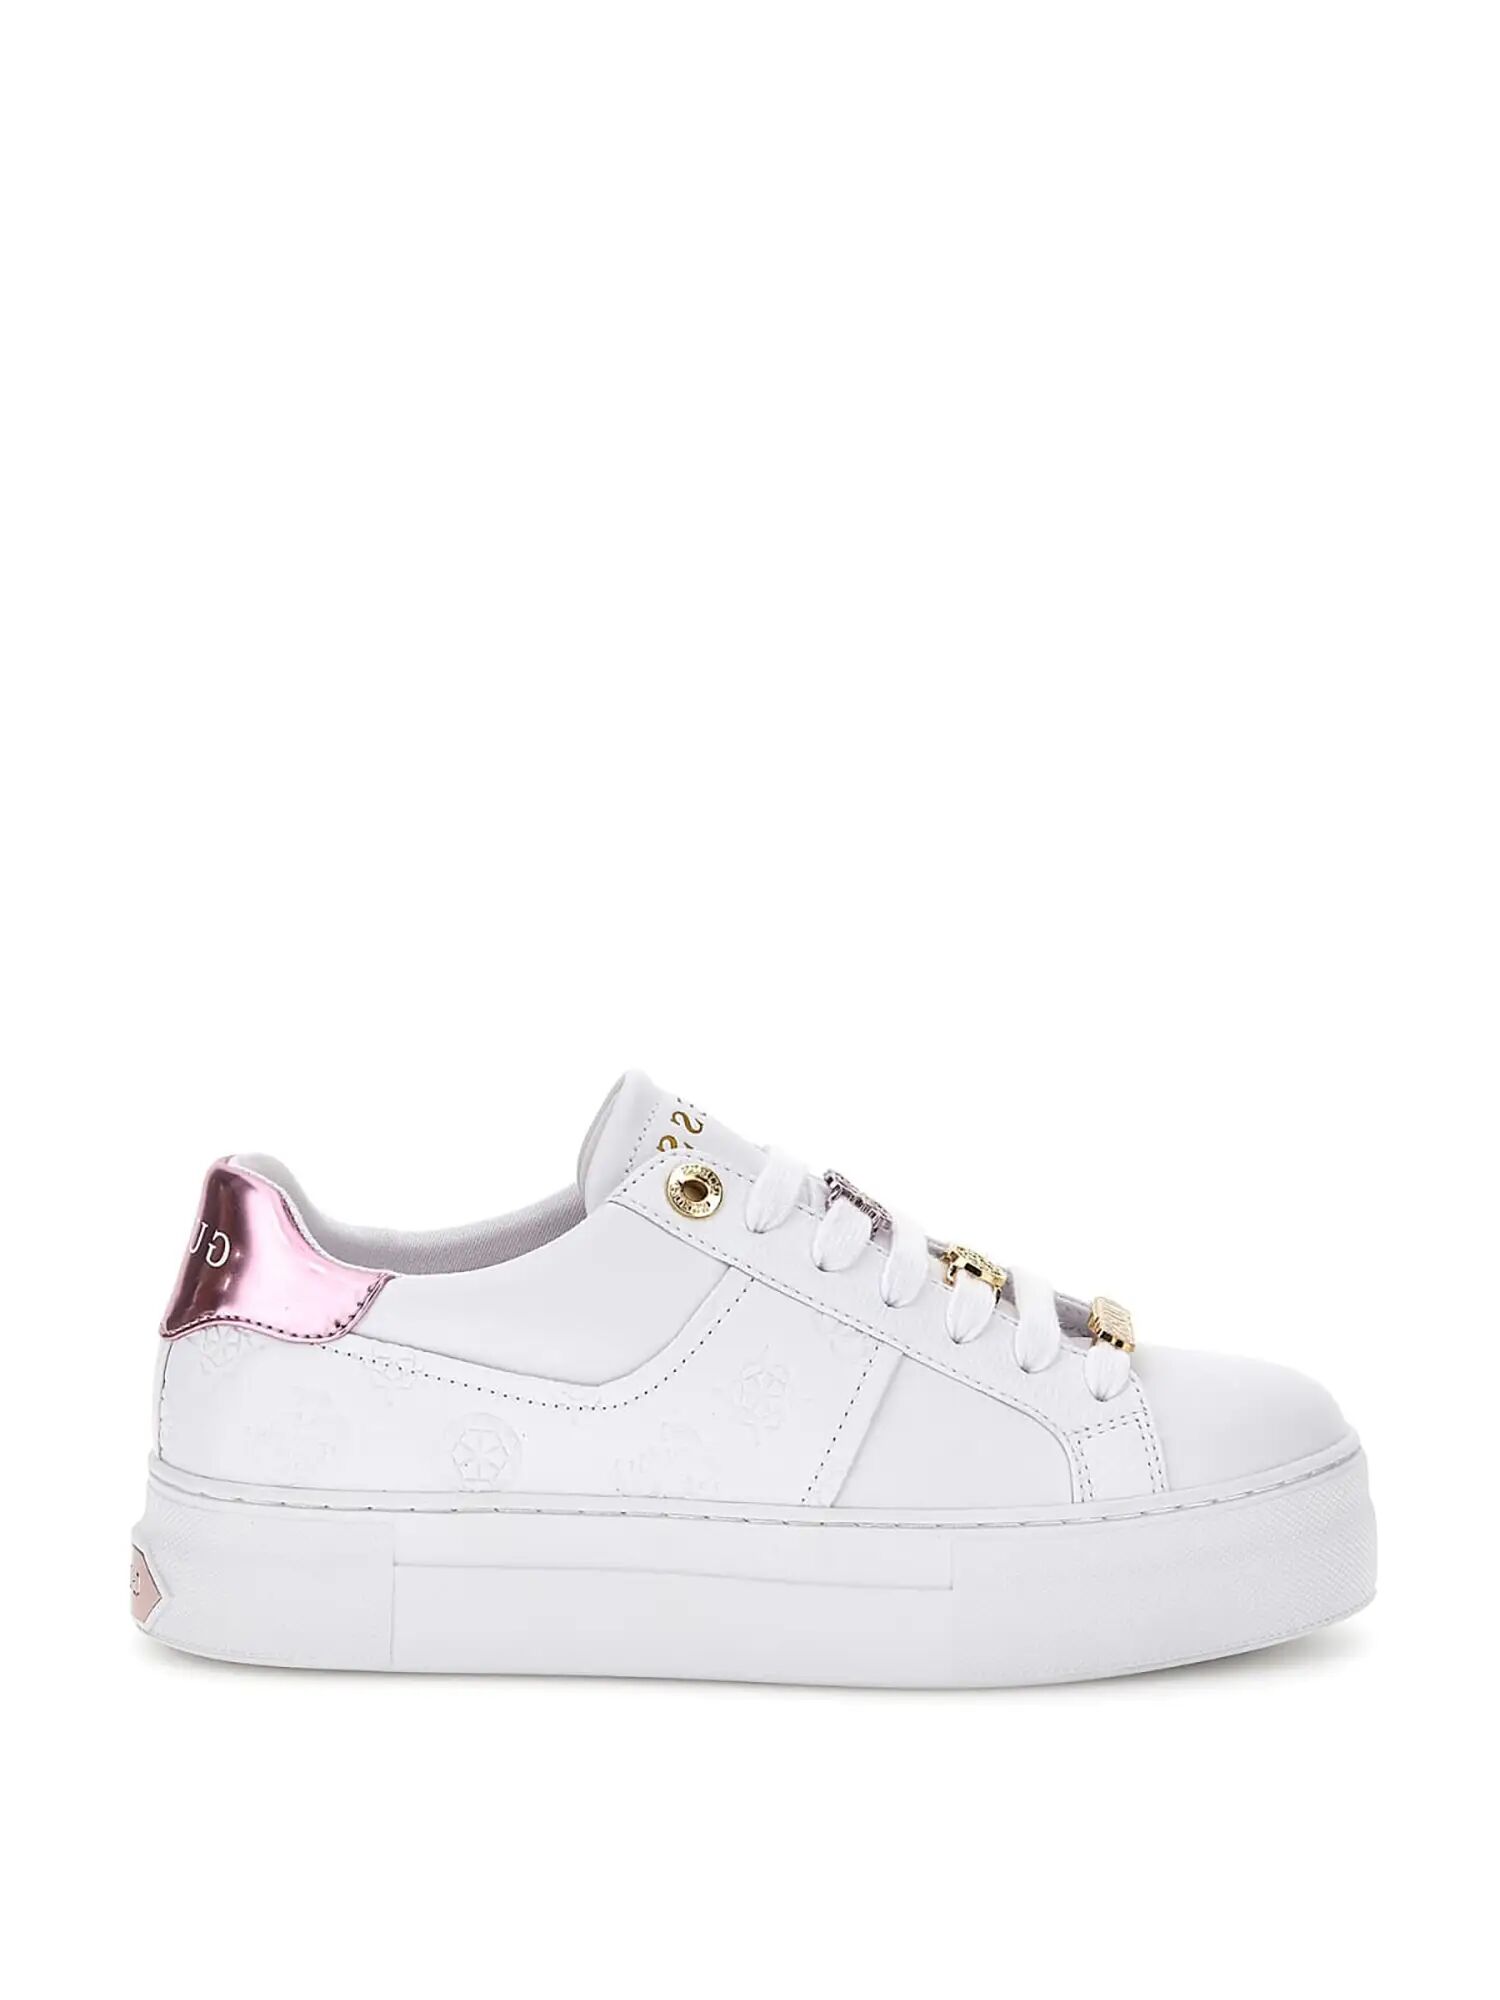 Guess Sneakers Bianche Donna BIANCO/ROSA 36